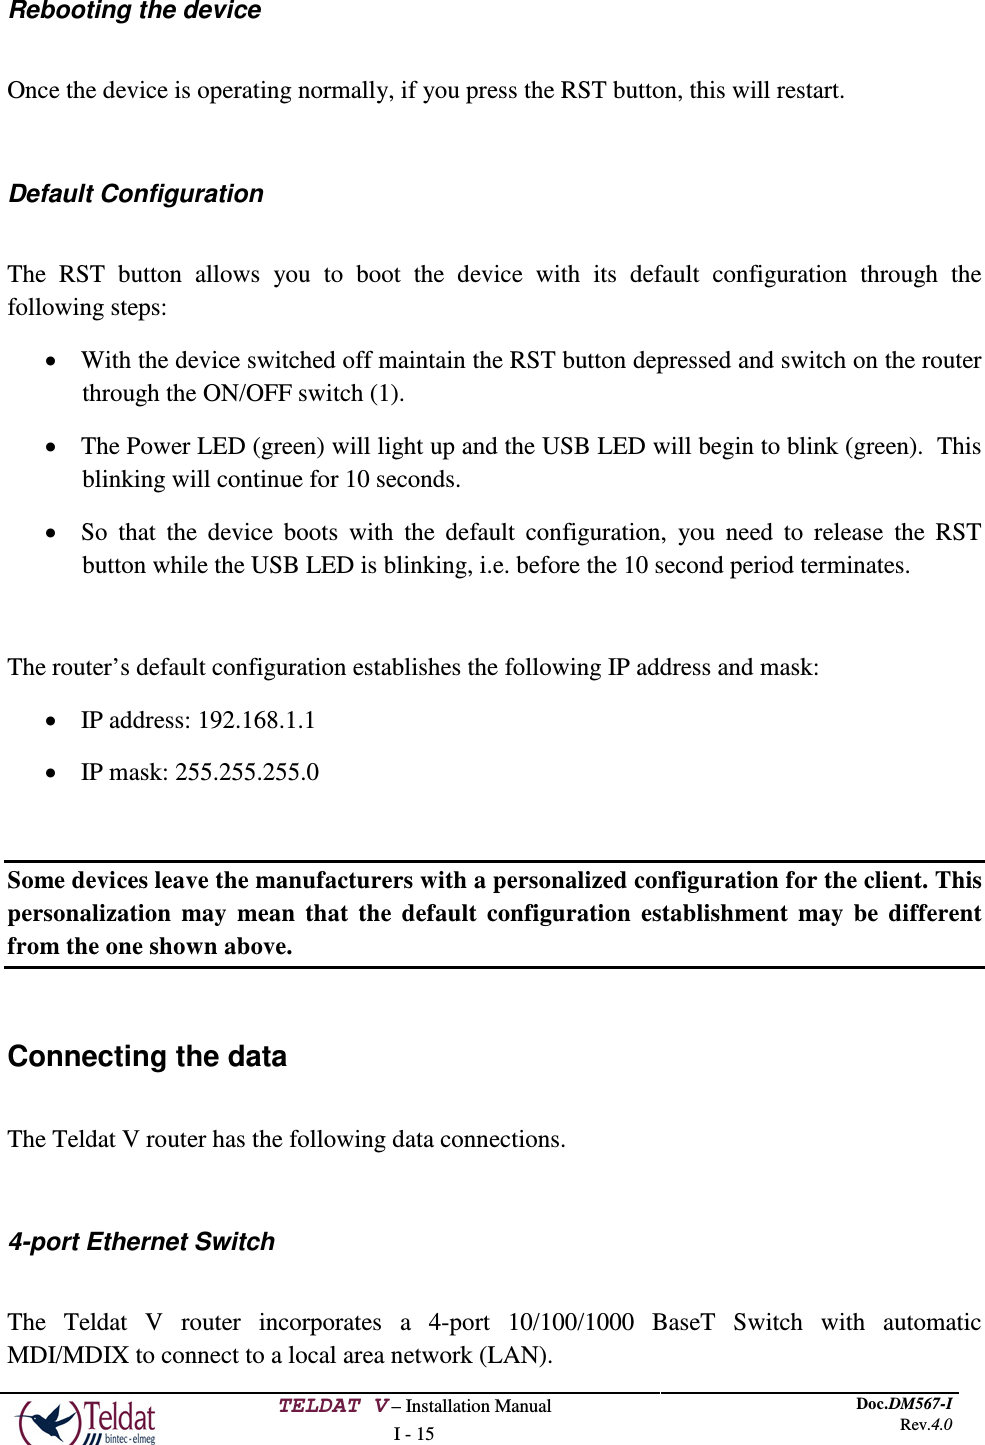  TELDAT V – Installation Manual I - 15 Doc.DM567-I Rev.4.0   Rebooting the device  Once the device is operating normally, if you press the RST button, this will restart.  Default Configuration  The RST button allows you to boot the device with its default configuration through the following steps: • With the device switched off maintain the RST button depressed and switch on the router through the ON/OFF switch (1). • The Power LED (green) will light up and the USB LED will begin to blink (green).  This blinking will continue for 10 seconds. • So that the device boots with the default configuration, you need to release the RST button while the USB LED is blinking, i.e. before the 10 second period terminates.  The router’s default configuration establishes the following IP address and mask: • IP address: 192.168.1.1 • IP mask: 255.255.255.0  Some devices leave the manufacturers with a personalized configuration for the client. This personalization may mean that the default configuration establishment may be different from the one shown above.  Connecting the data  The Teldat V router has the following data connections.  4-port Ethernet Switch  The  Teldat V router  incorporates a 4-port 10/100/1000 BaseT Switch with automatic MDI/MDIX to connect to a local area network (LAN). 